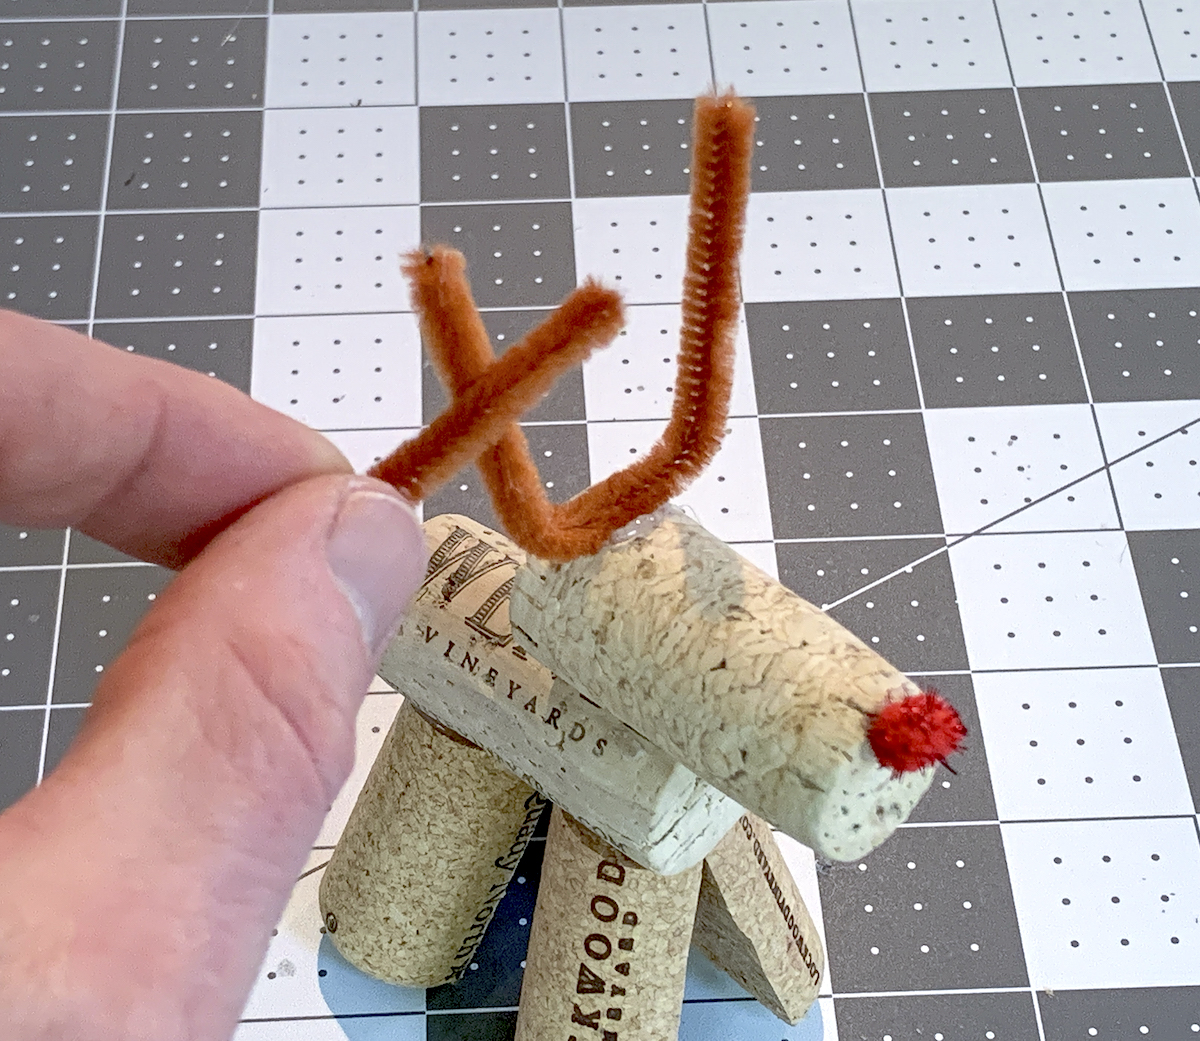 Adding more pipe cleaner antlers